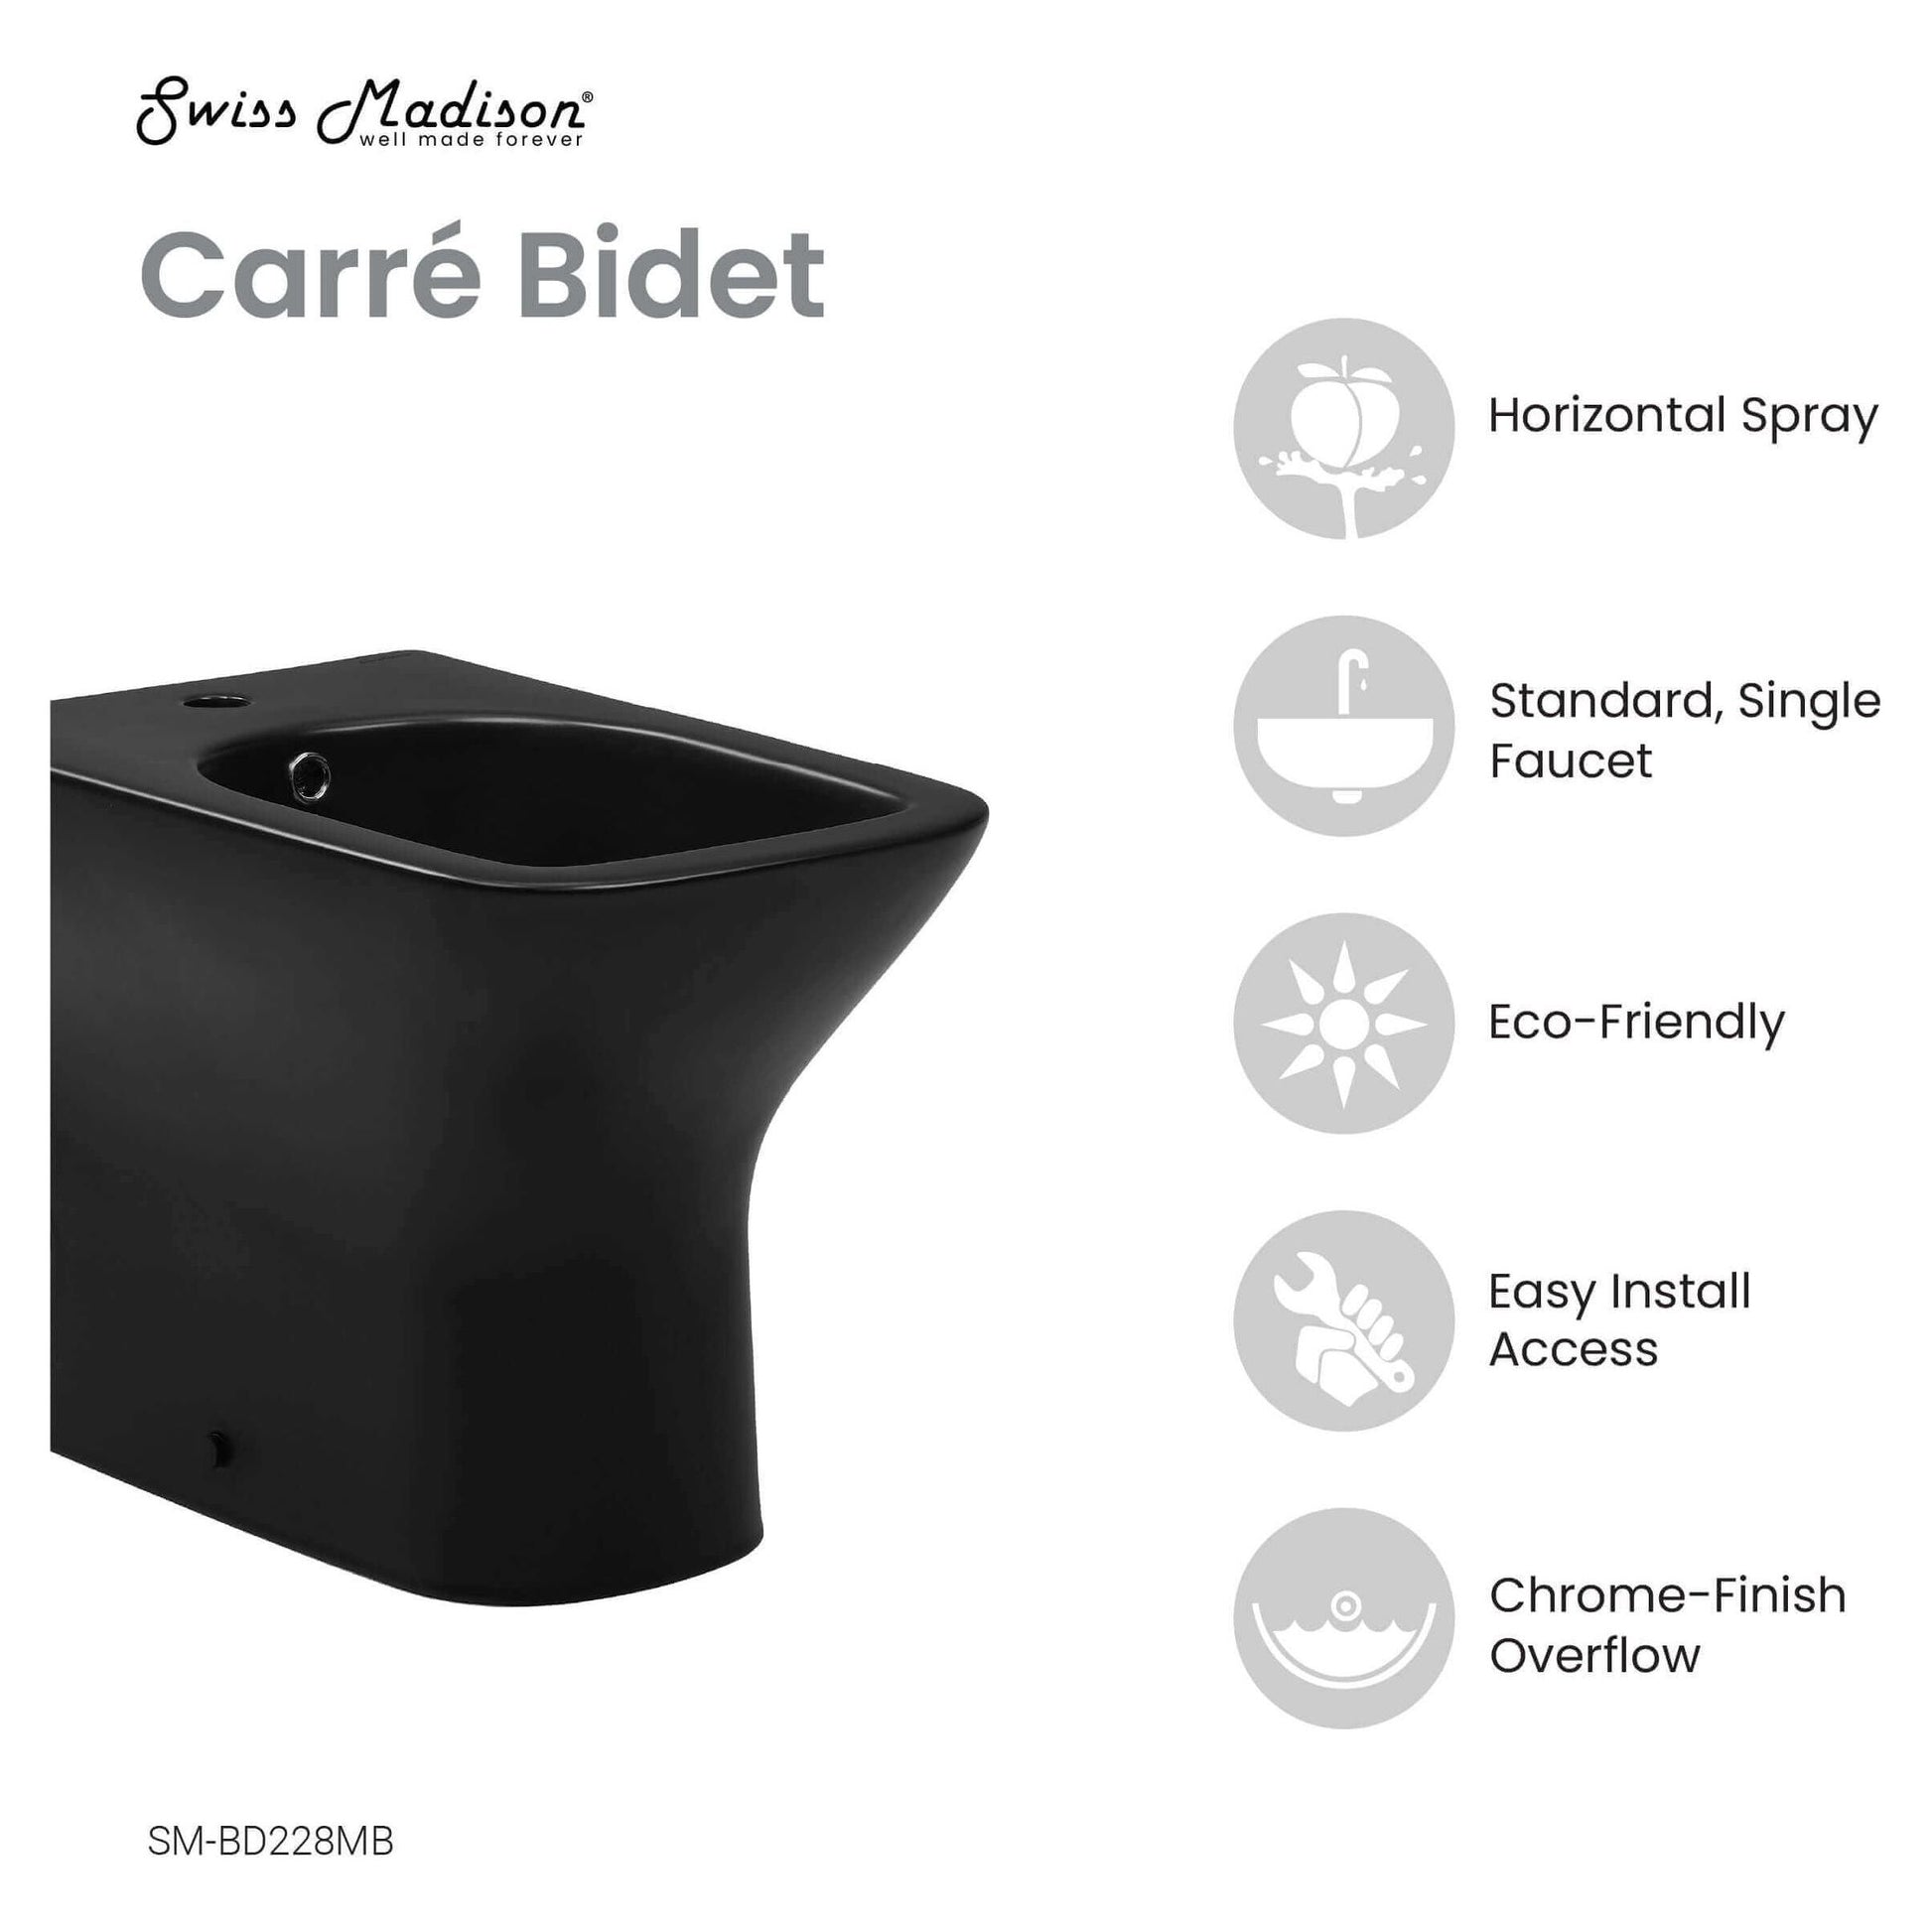 Carre Bidet - side angled view with features listed